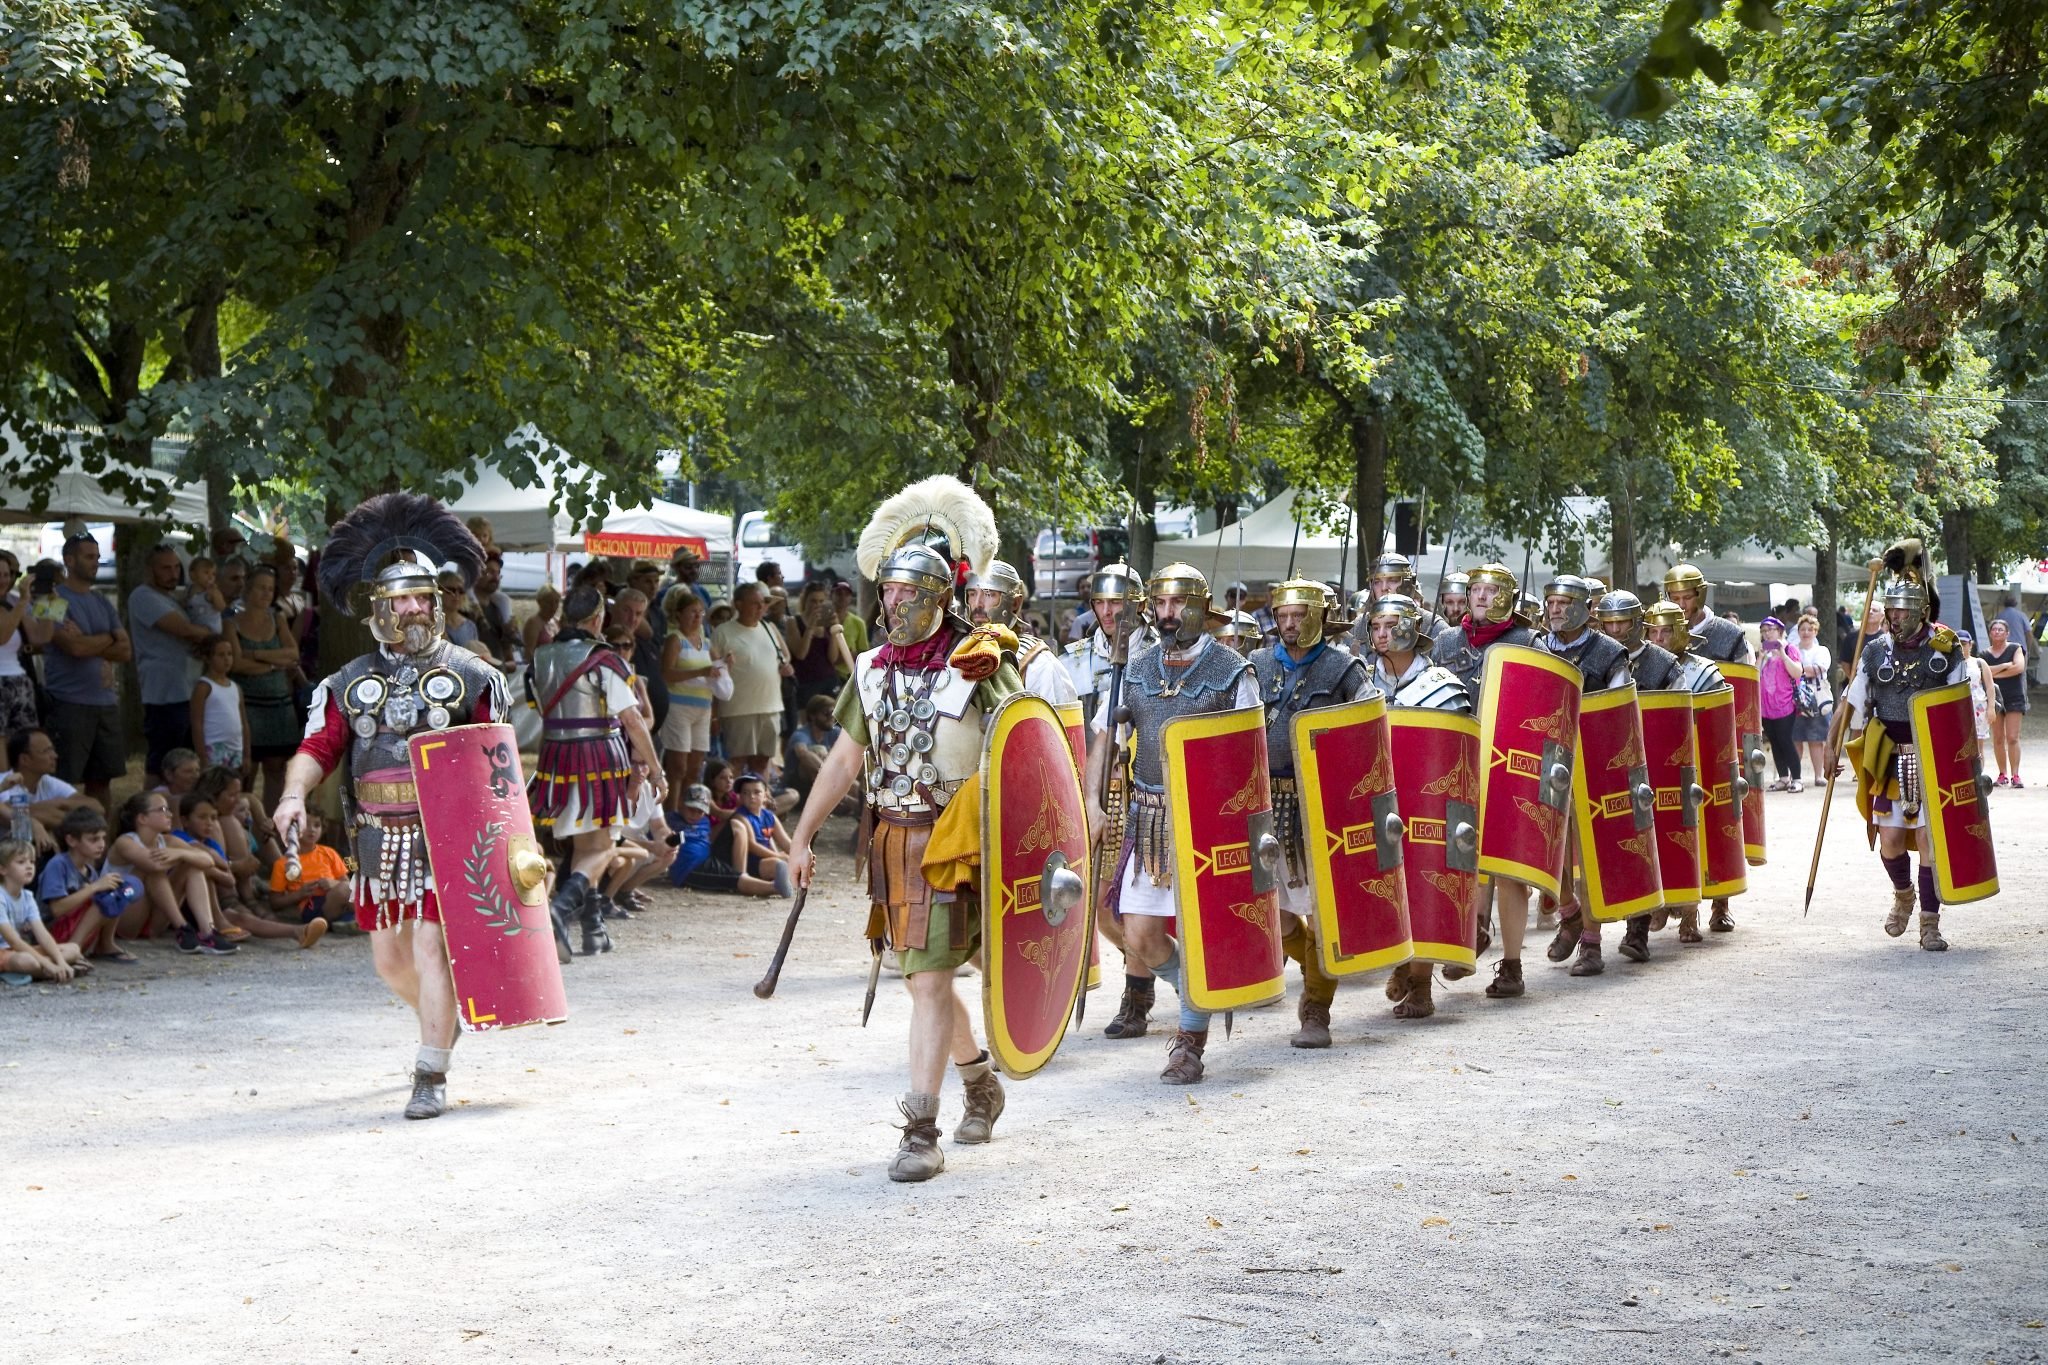 Roman spectacle in Autun, with gladiators and legionaries, on August 5, 2018, in Autun, Burgundy, France.